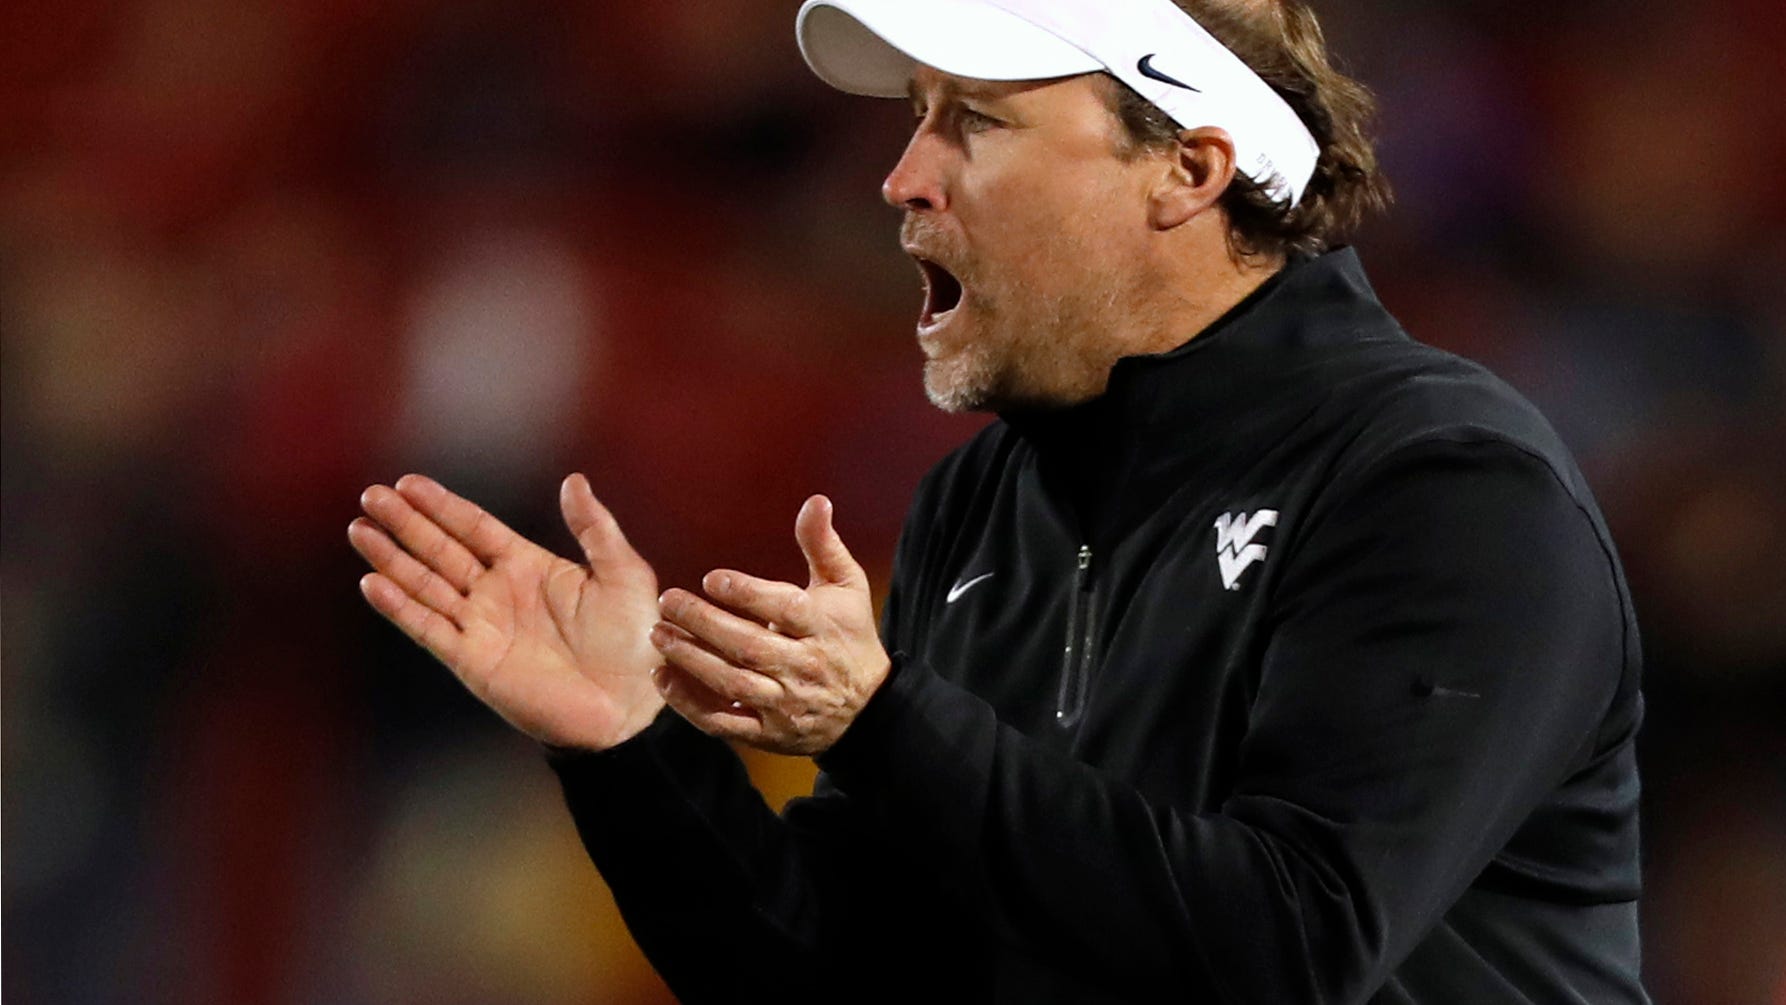 West Virginia Coach Holgorsen Gets 5 Year Contract Extension